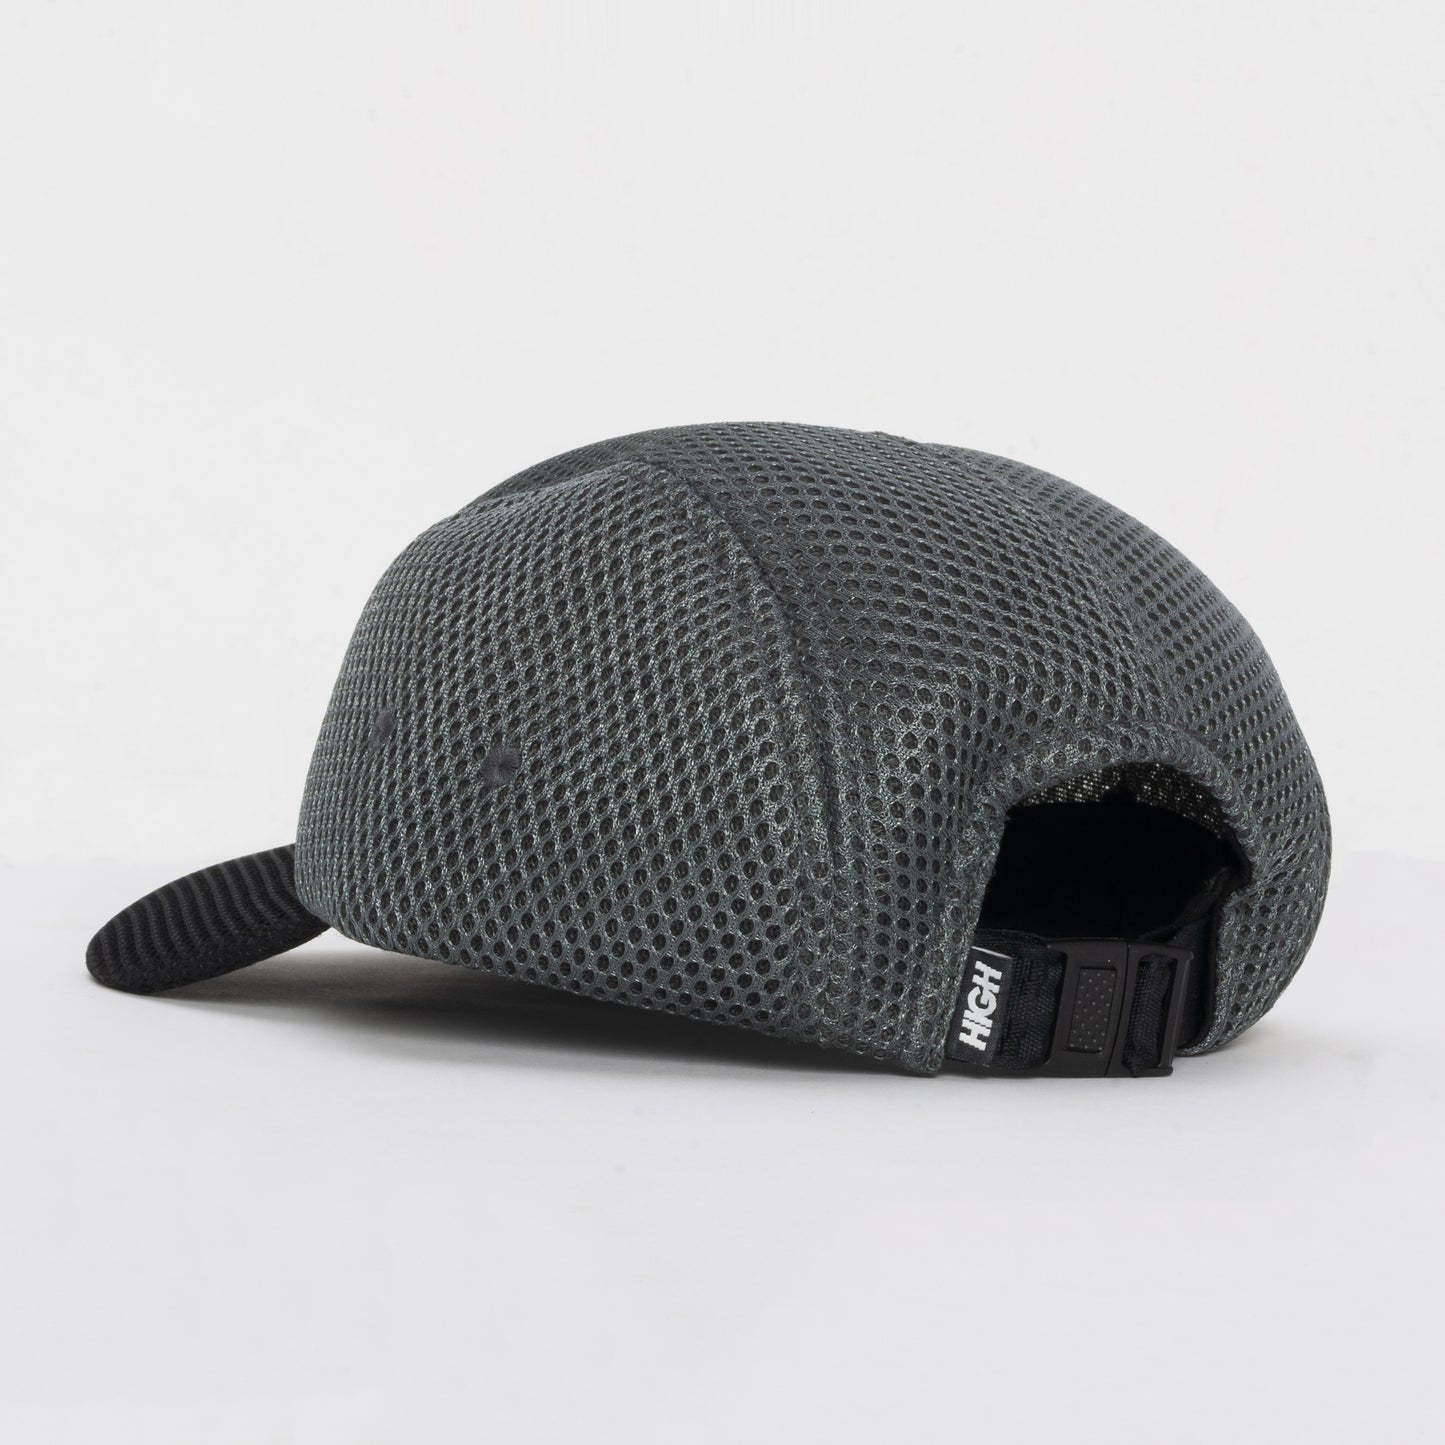 HIGH - 5 Panel Space Mesh "Black" - THE GAME